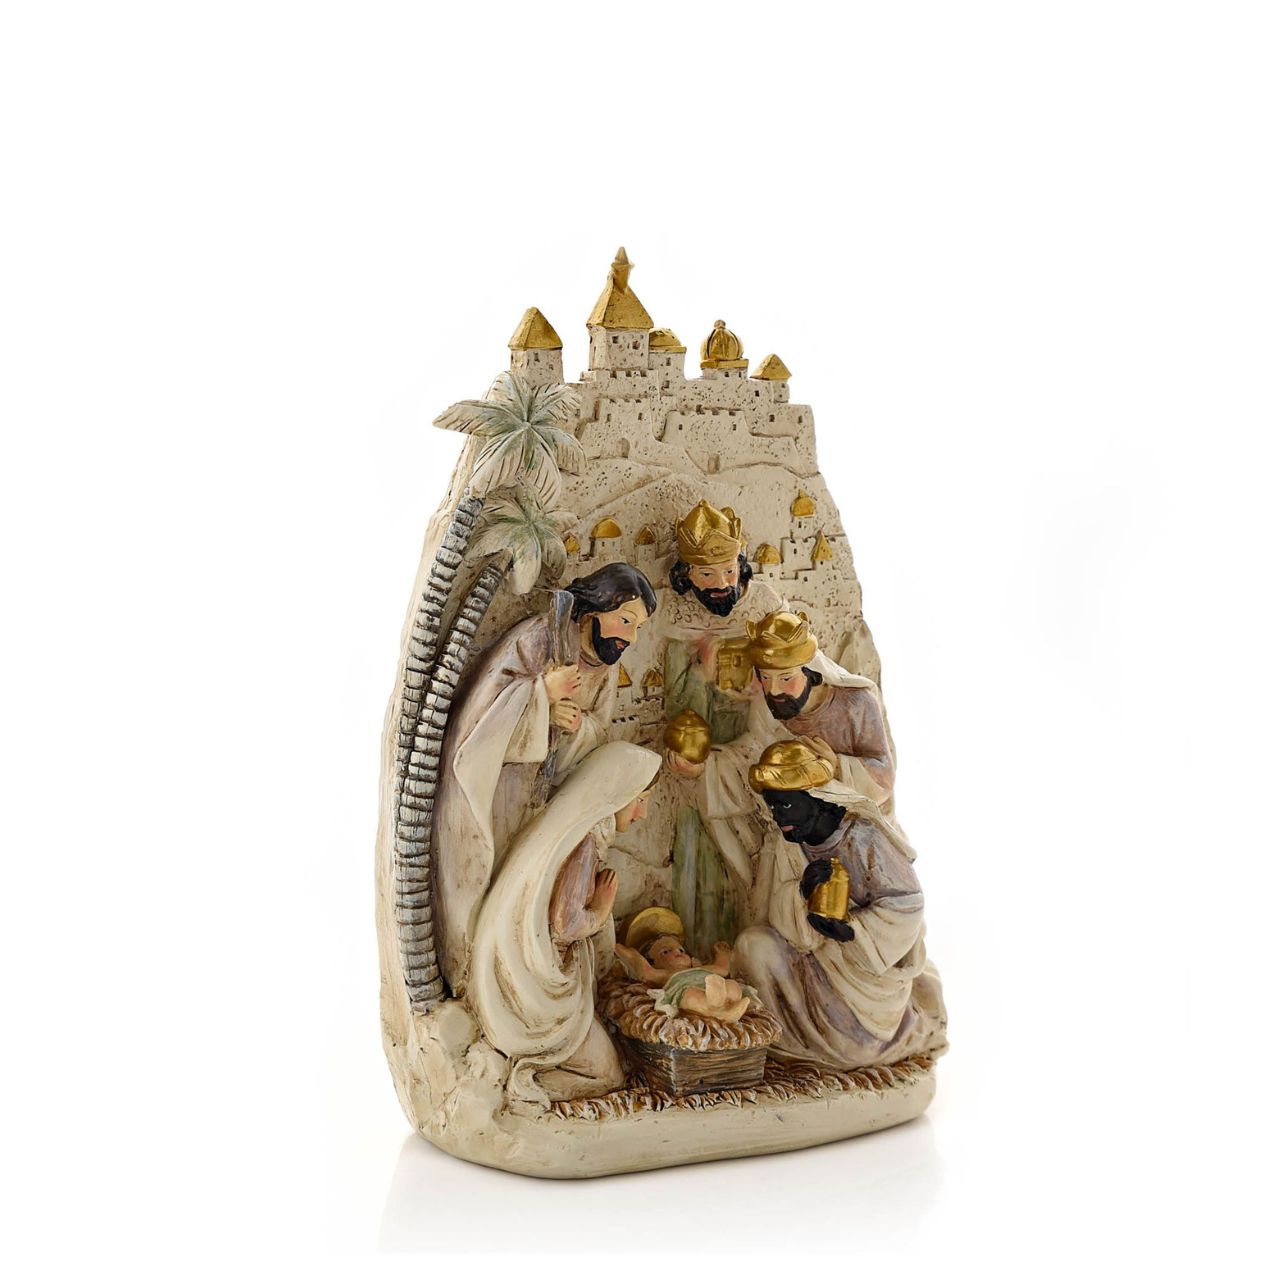 Christmas Nativity Set  Keep the true meaning of Christmas at the centre of your celebrations by decorating any living space with this beautiful Nativity set.